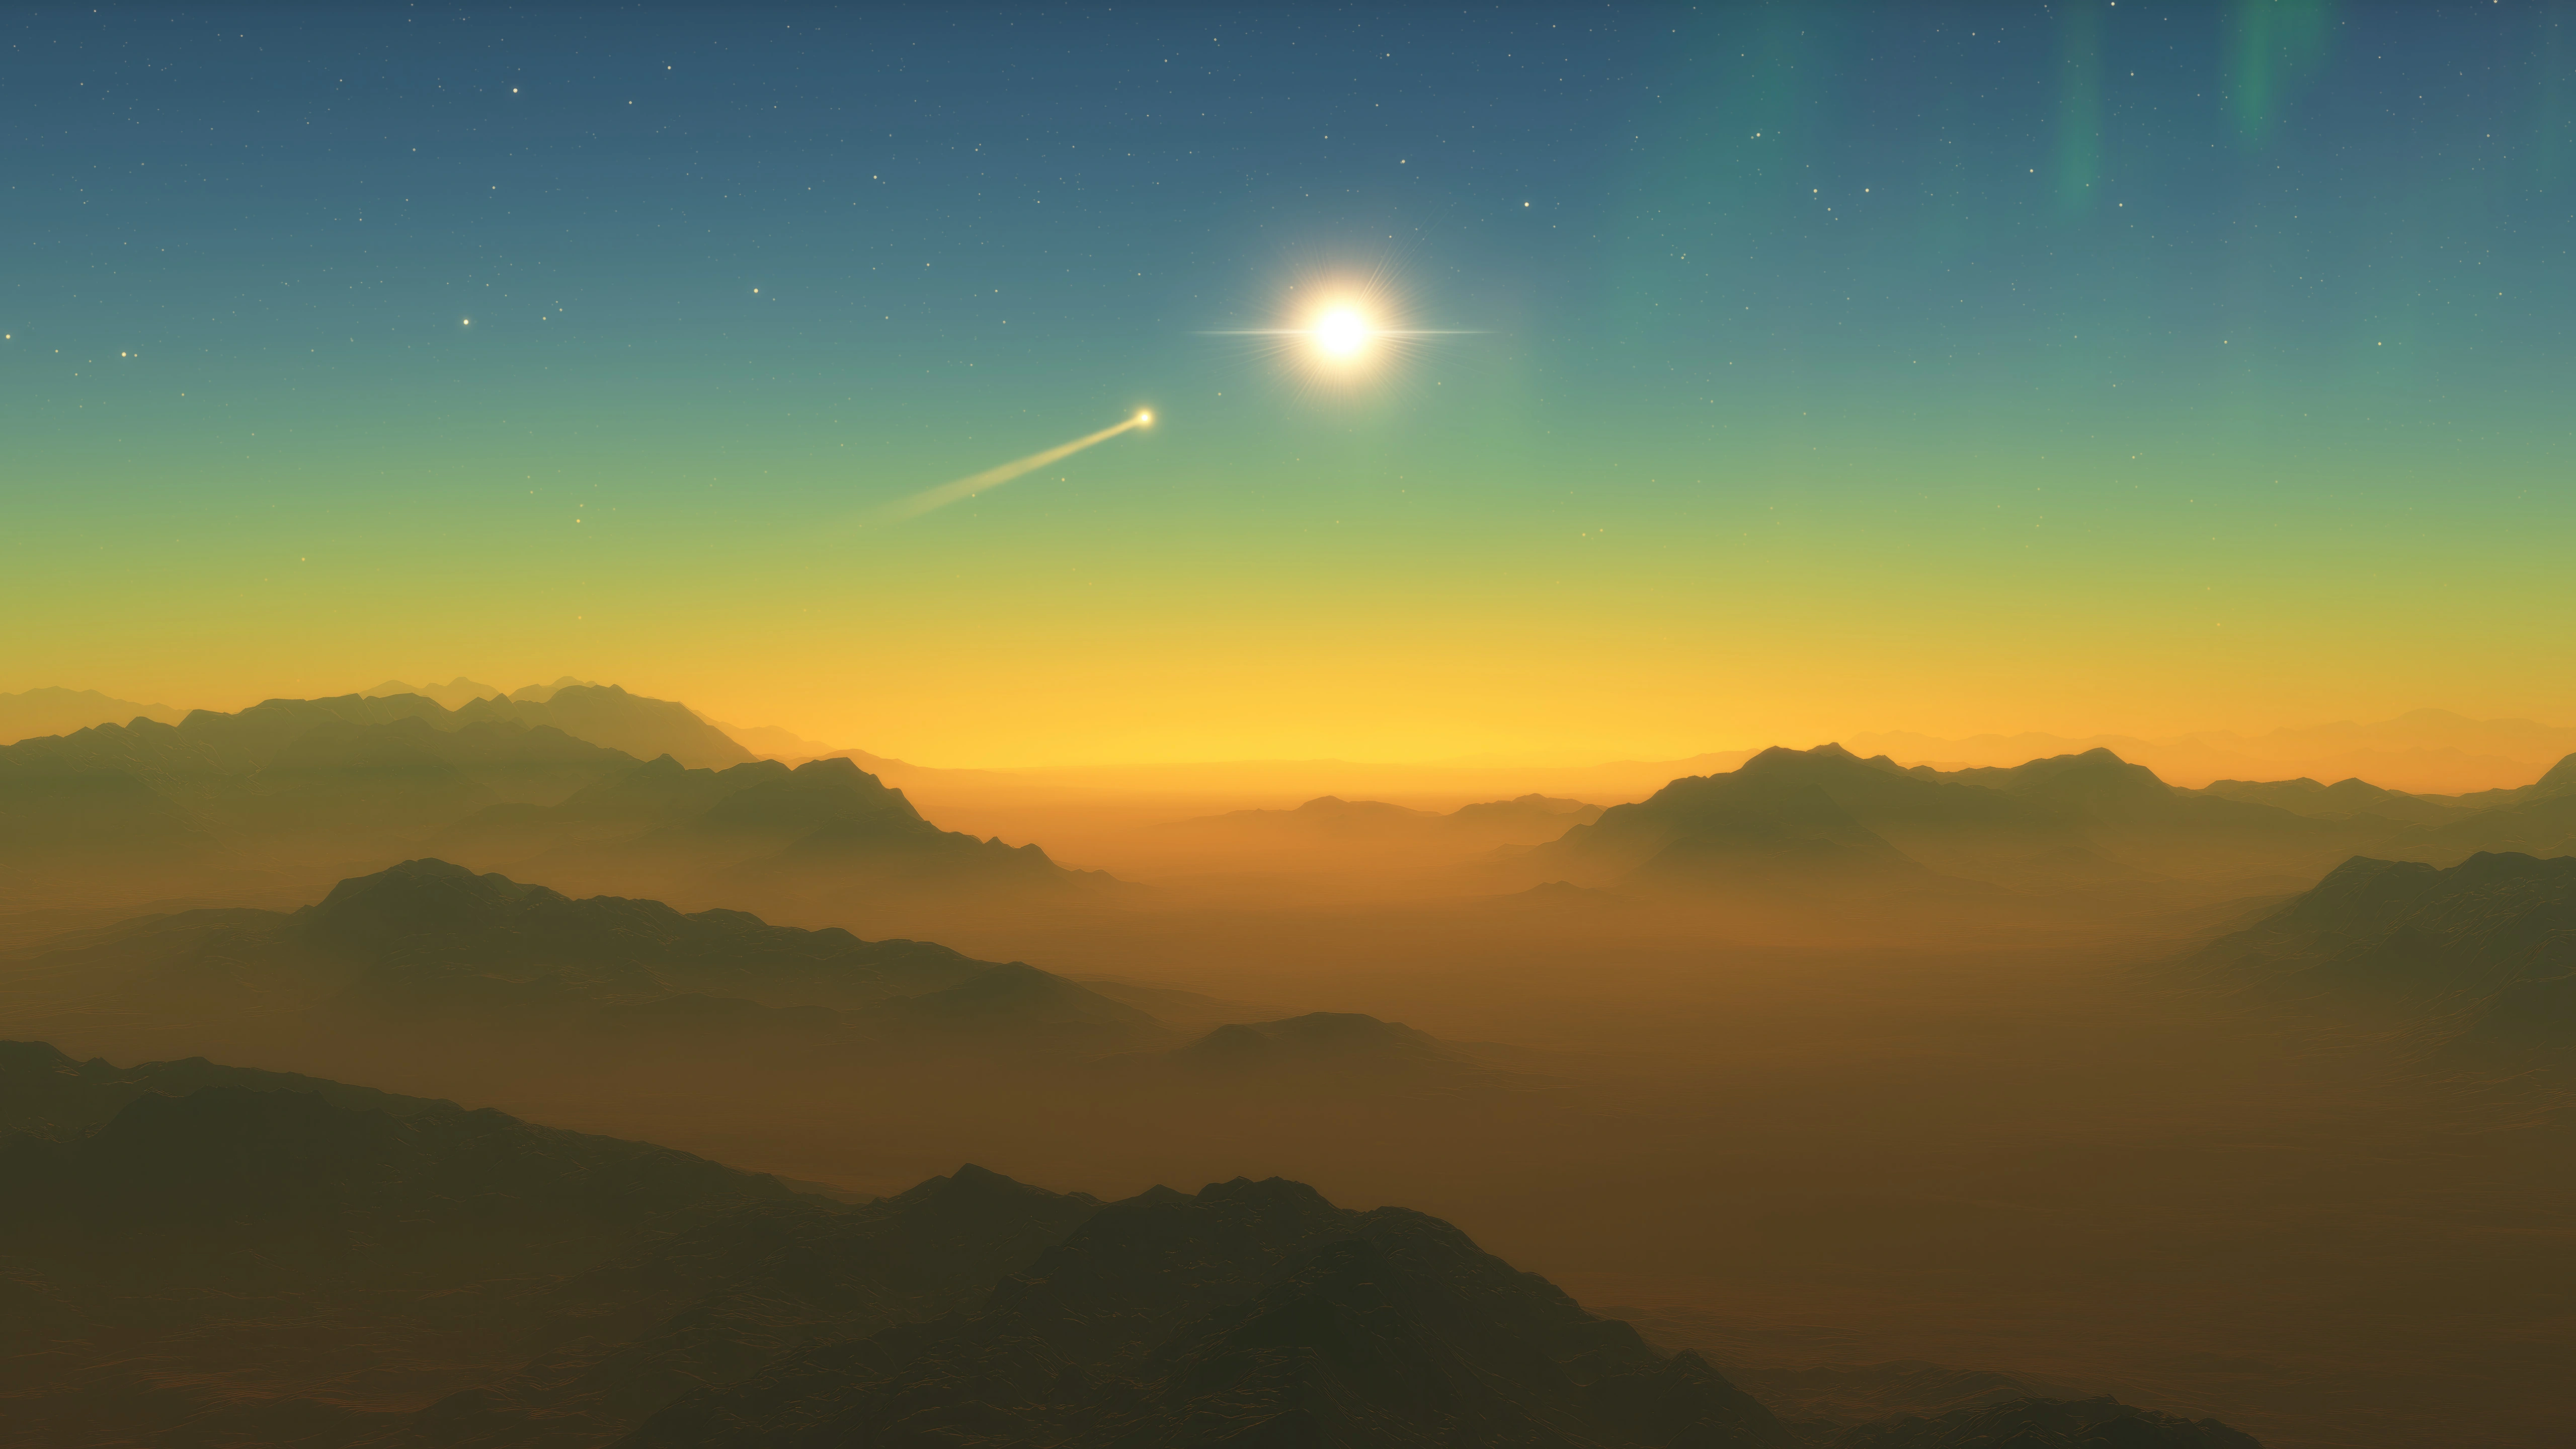 planet with high rugged mountains and a comet in the sky lh.jpg